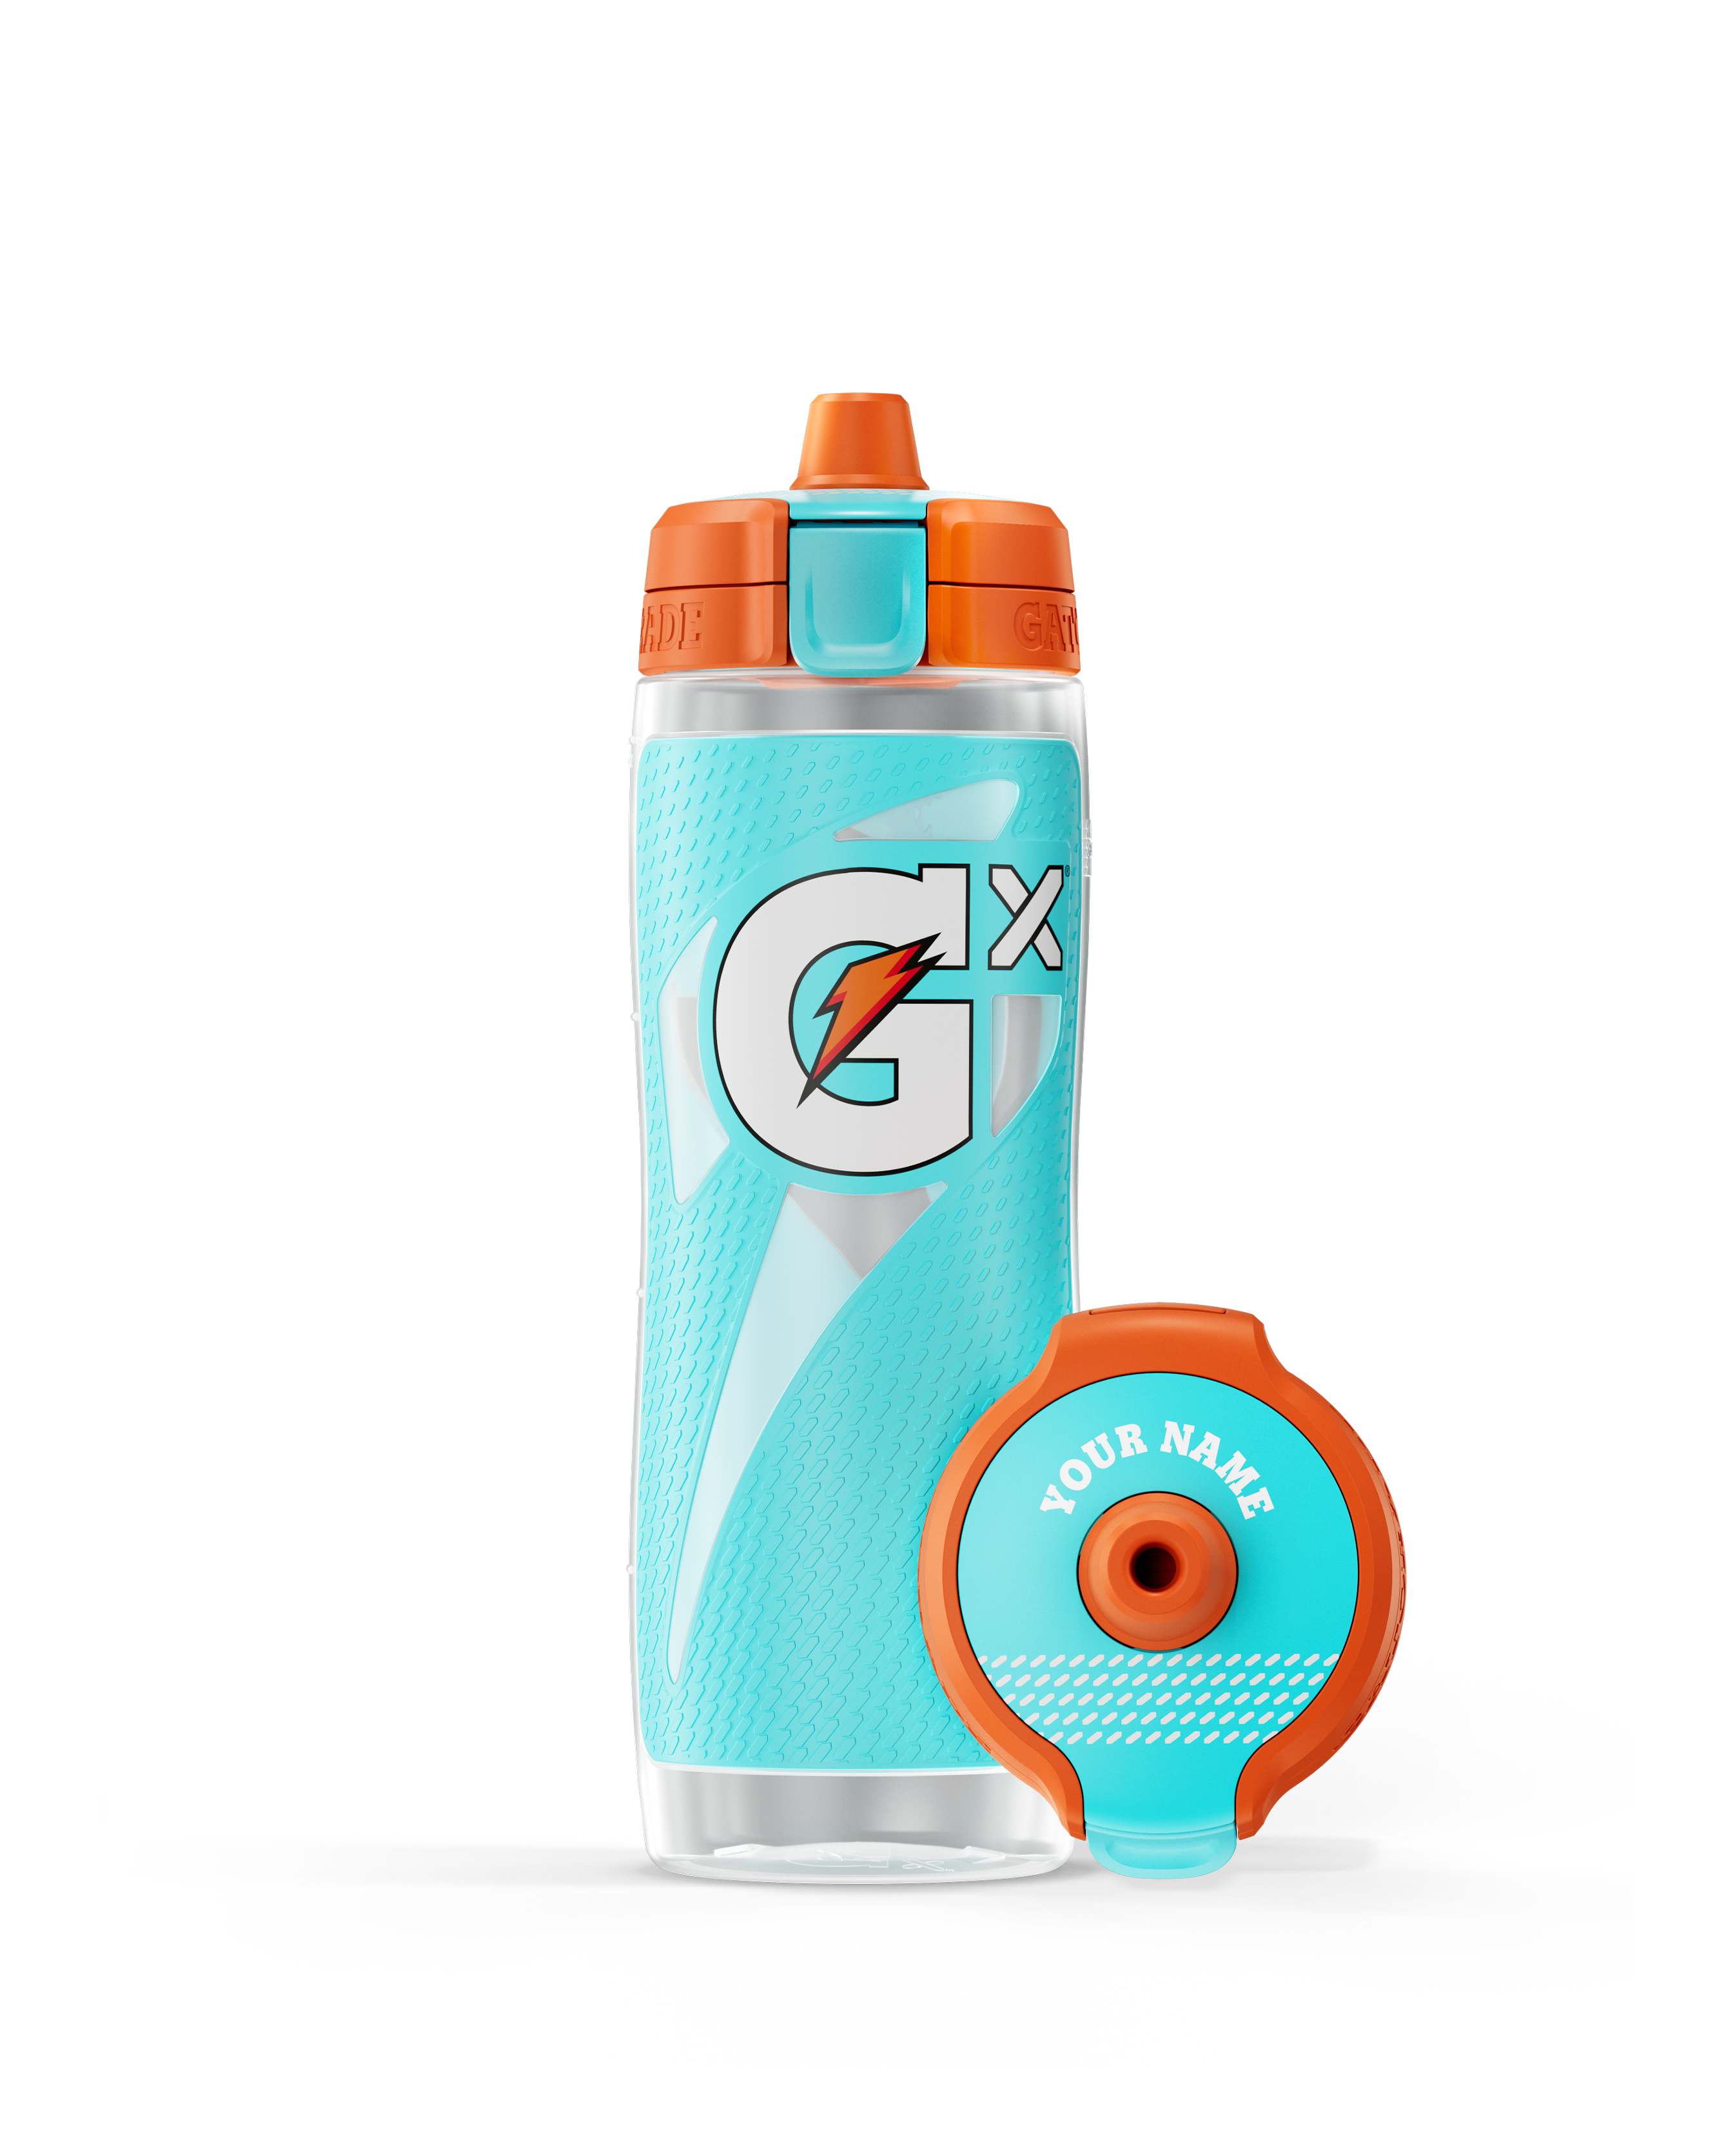 Gx Squeeze Bottle in Neon Blue Product Tile